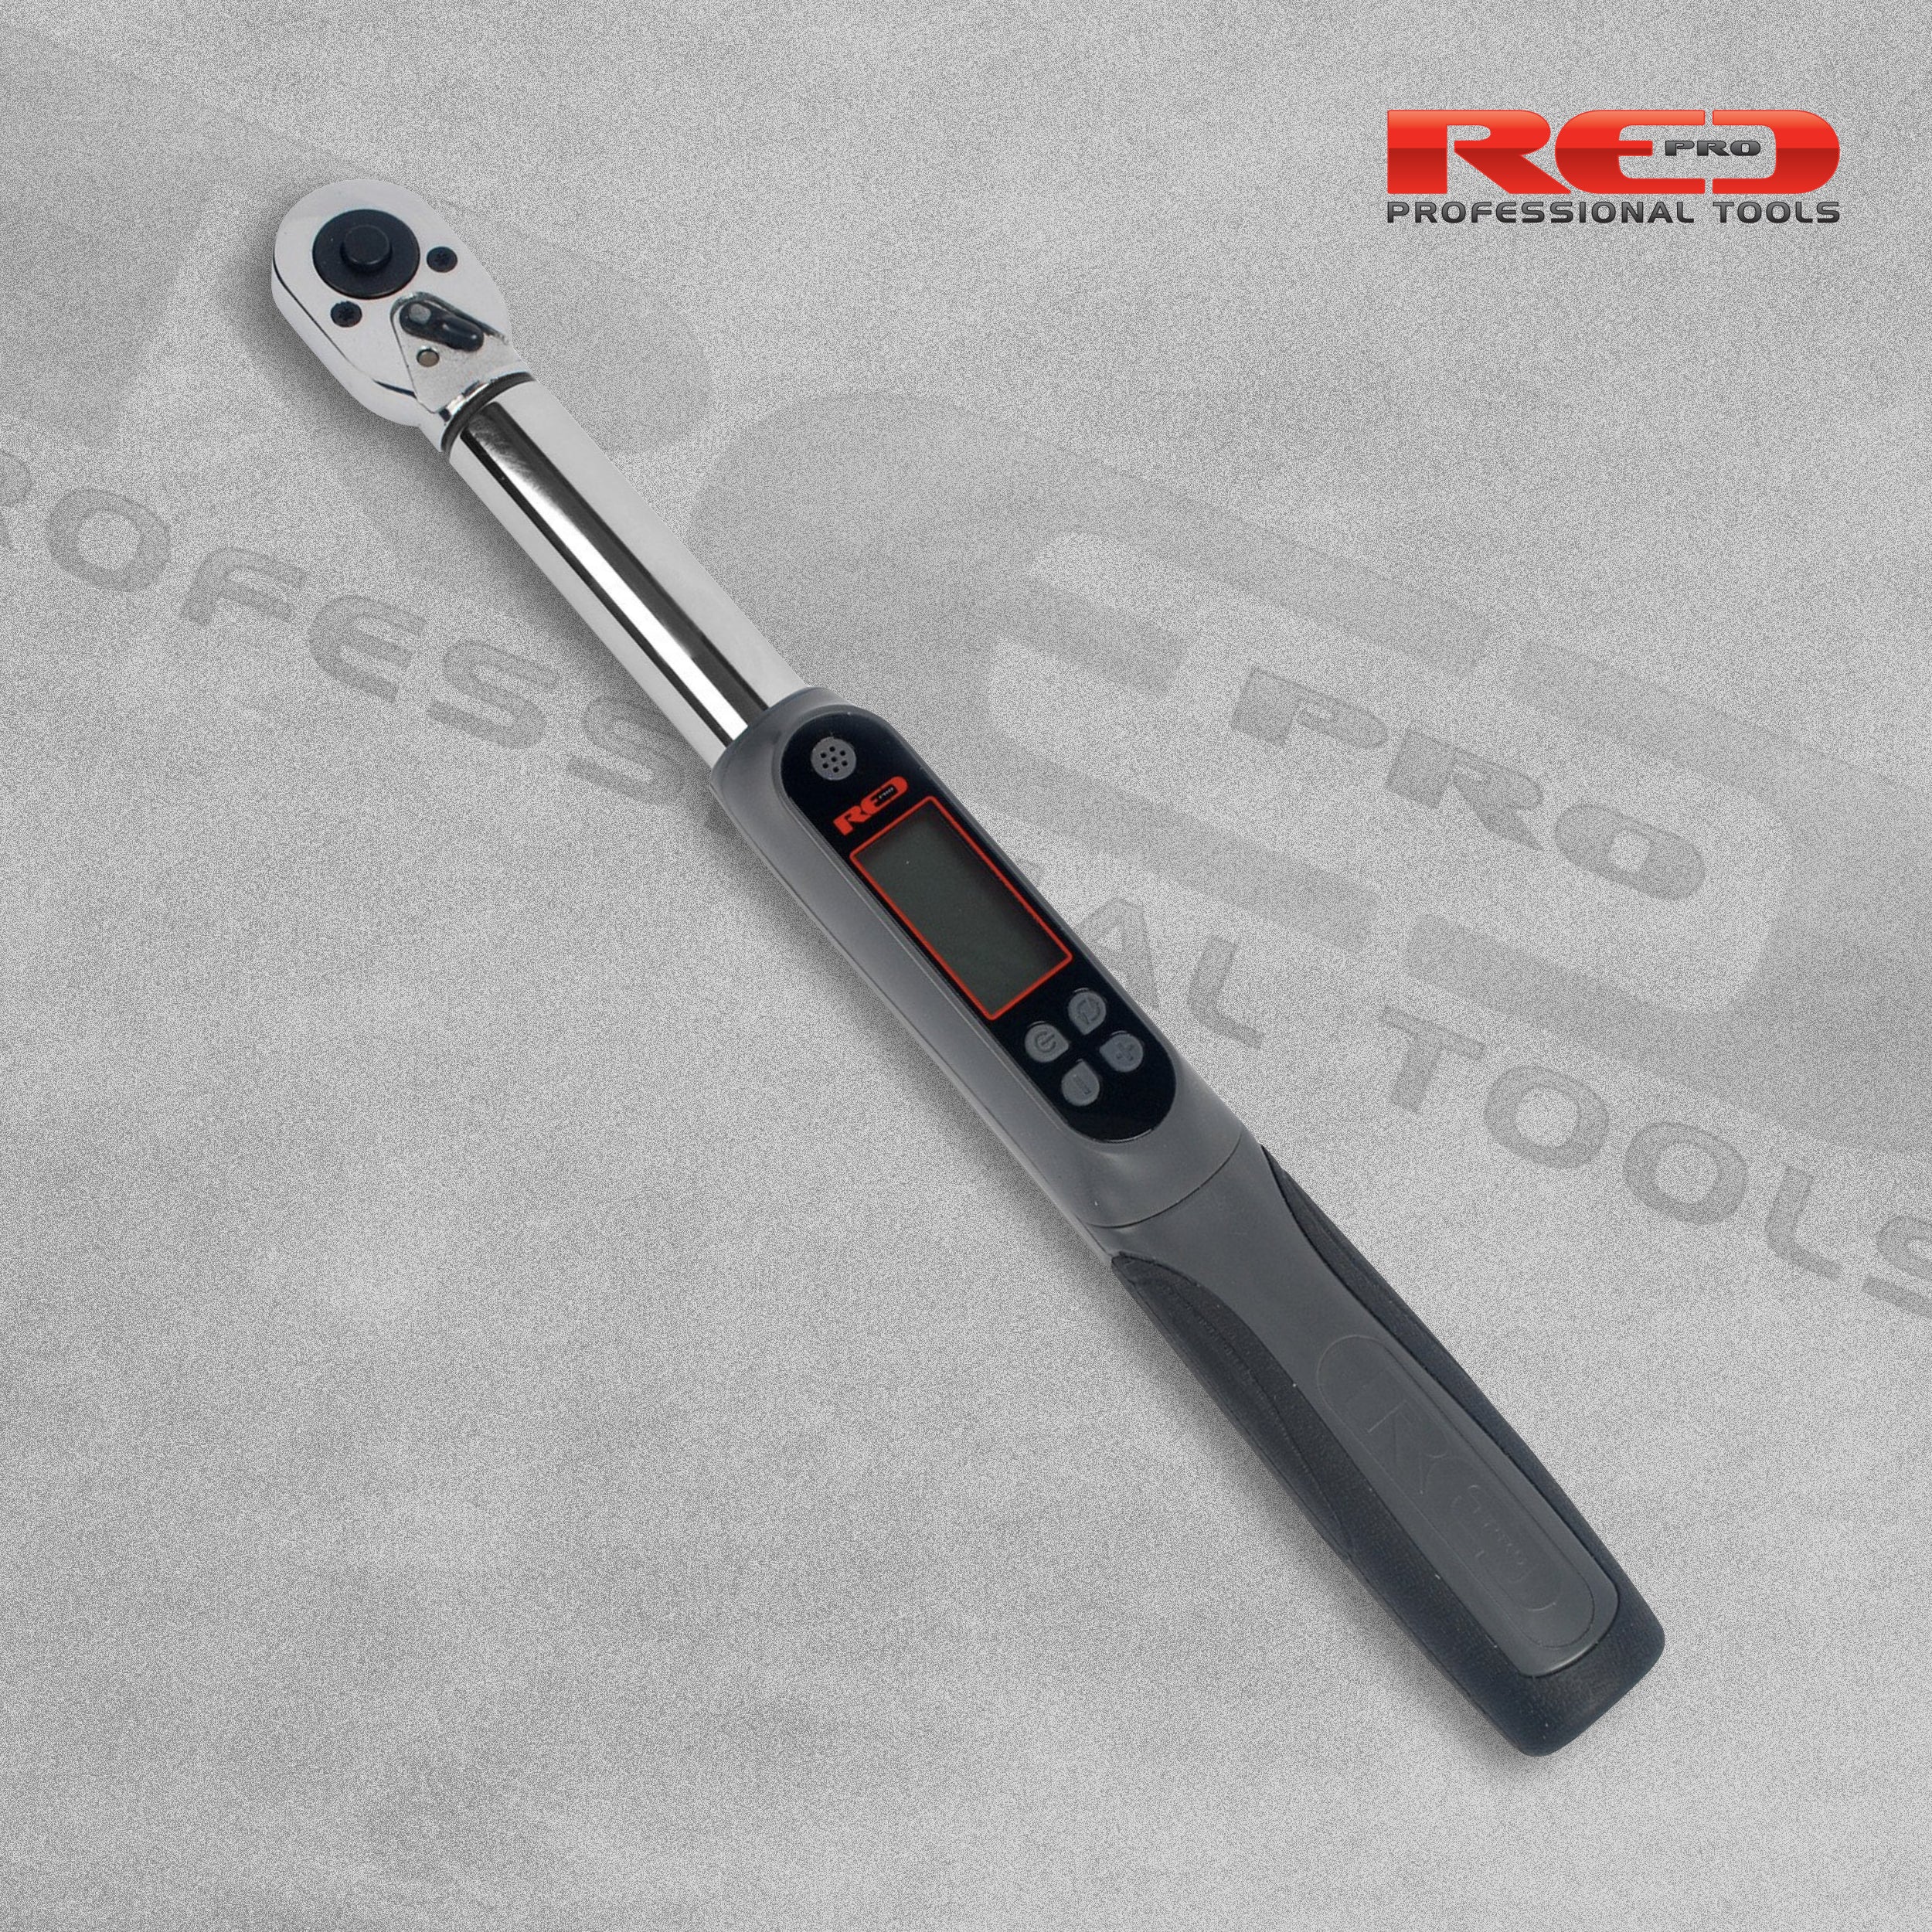 Red Pro Tools 3/8" Drive Digital Torque Wrench (370mm)